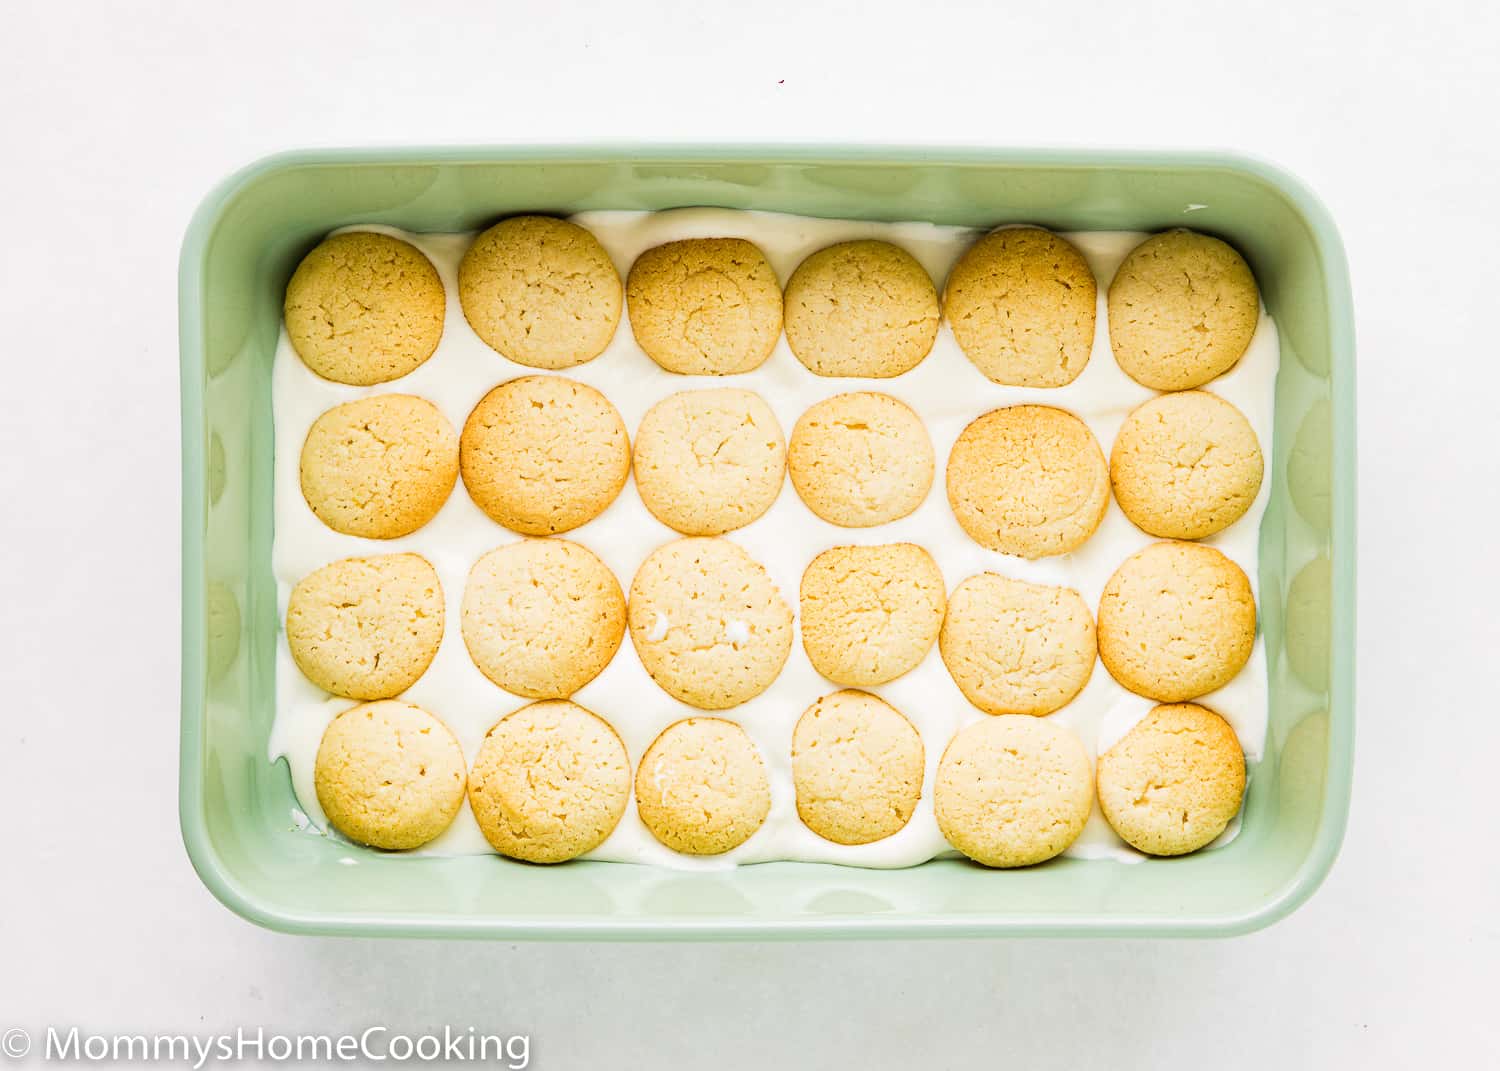 A rectangular green dish with pudding on the bottom and egg-free vanilla wafers.